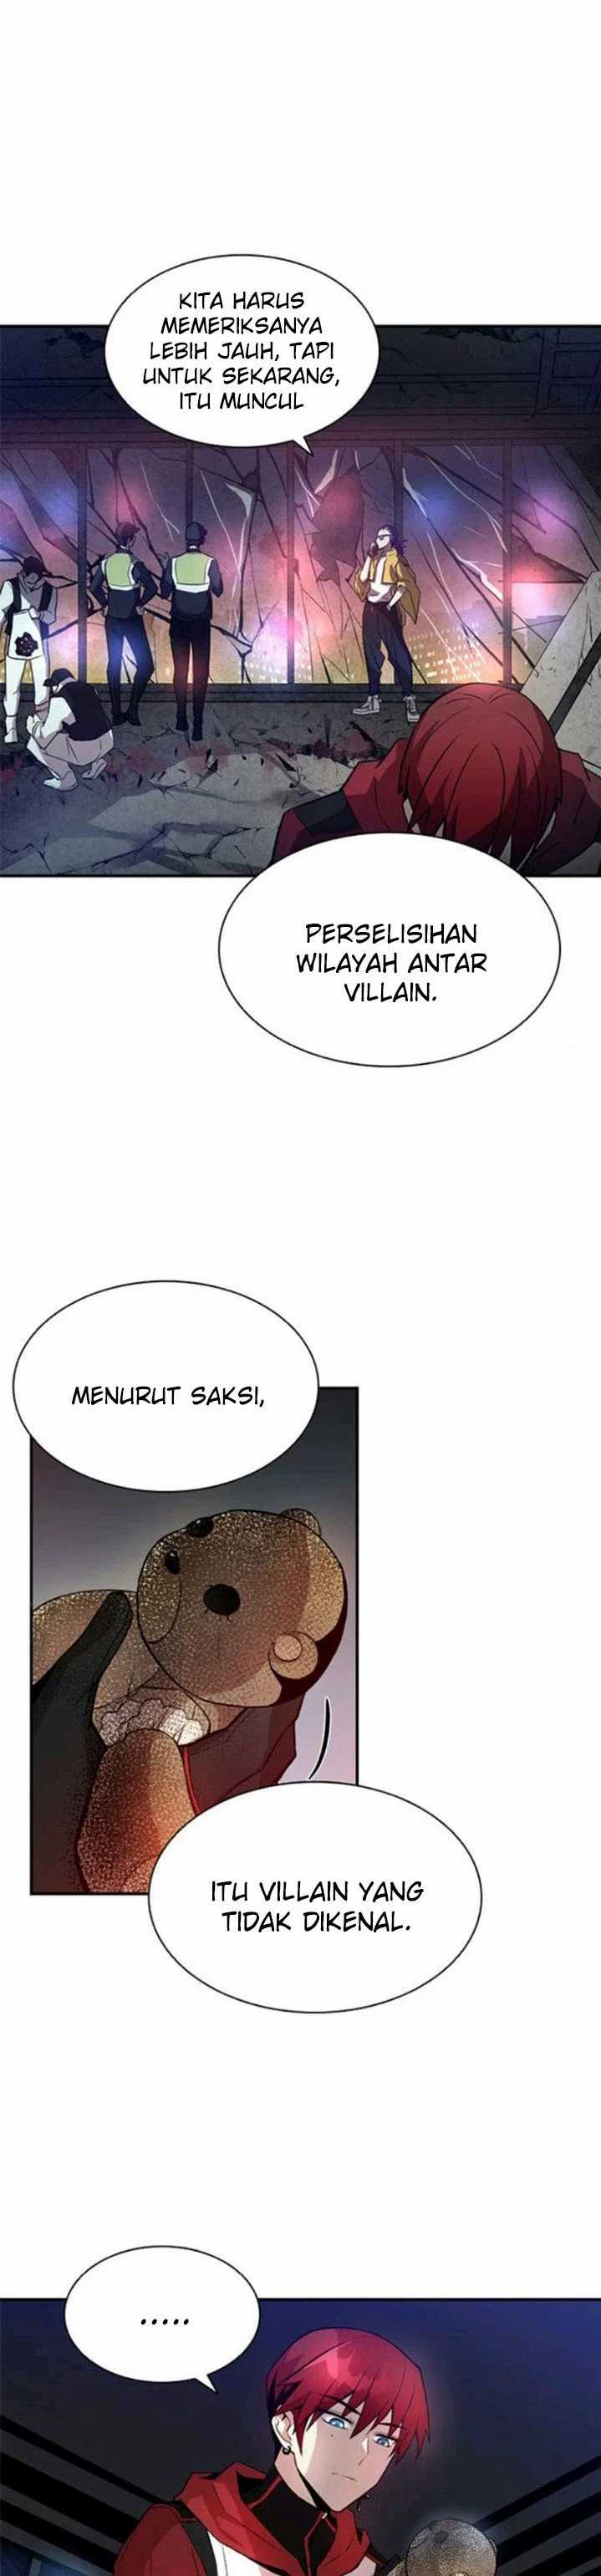 kill-to-villain Chapter chapter-07